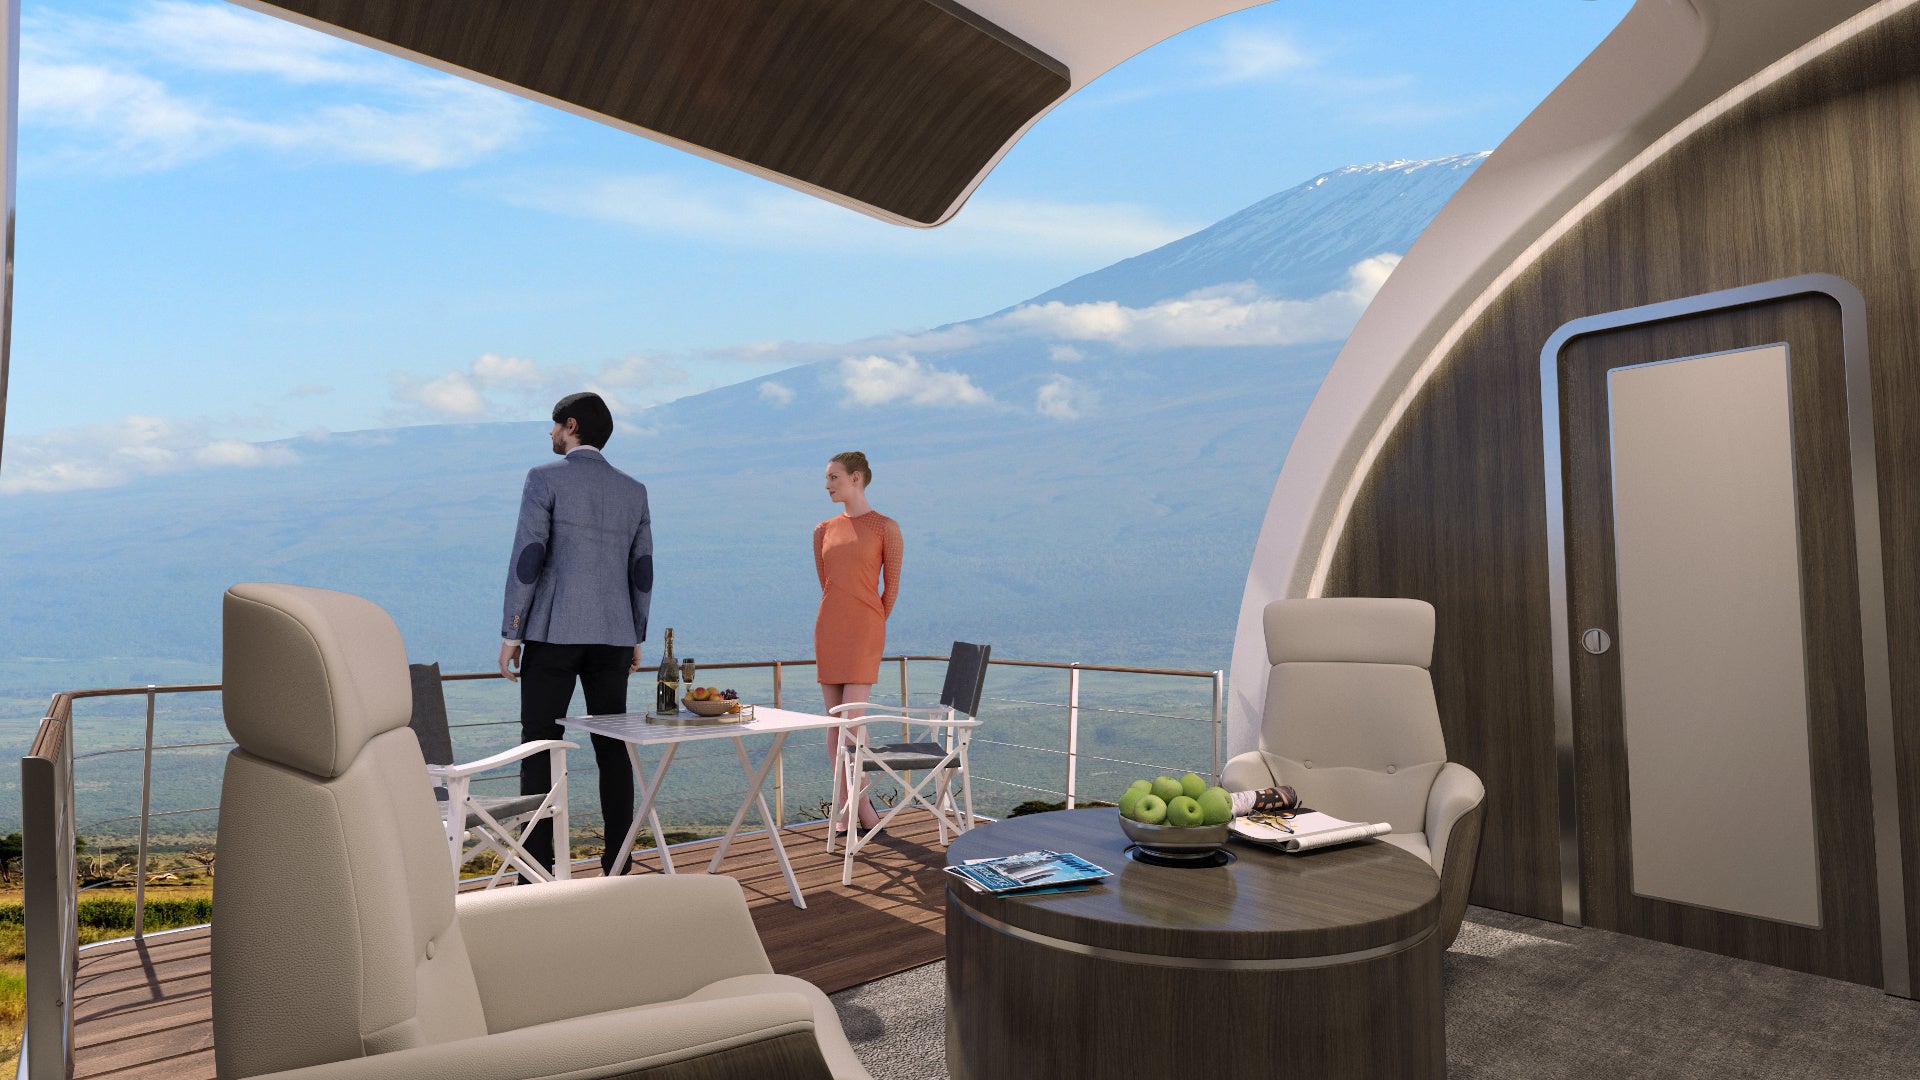 This Ridiculous $350 Million Luxury Jet Concept Has A Balcony And Disco